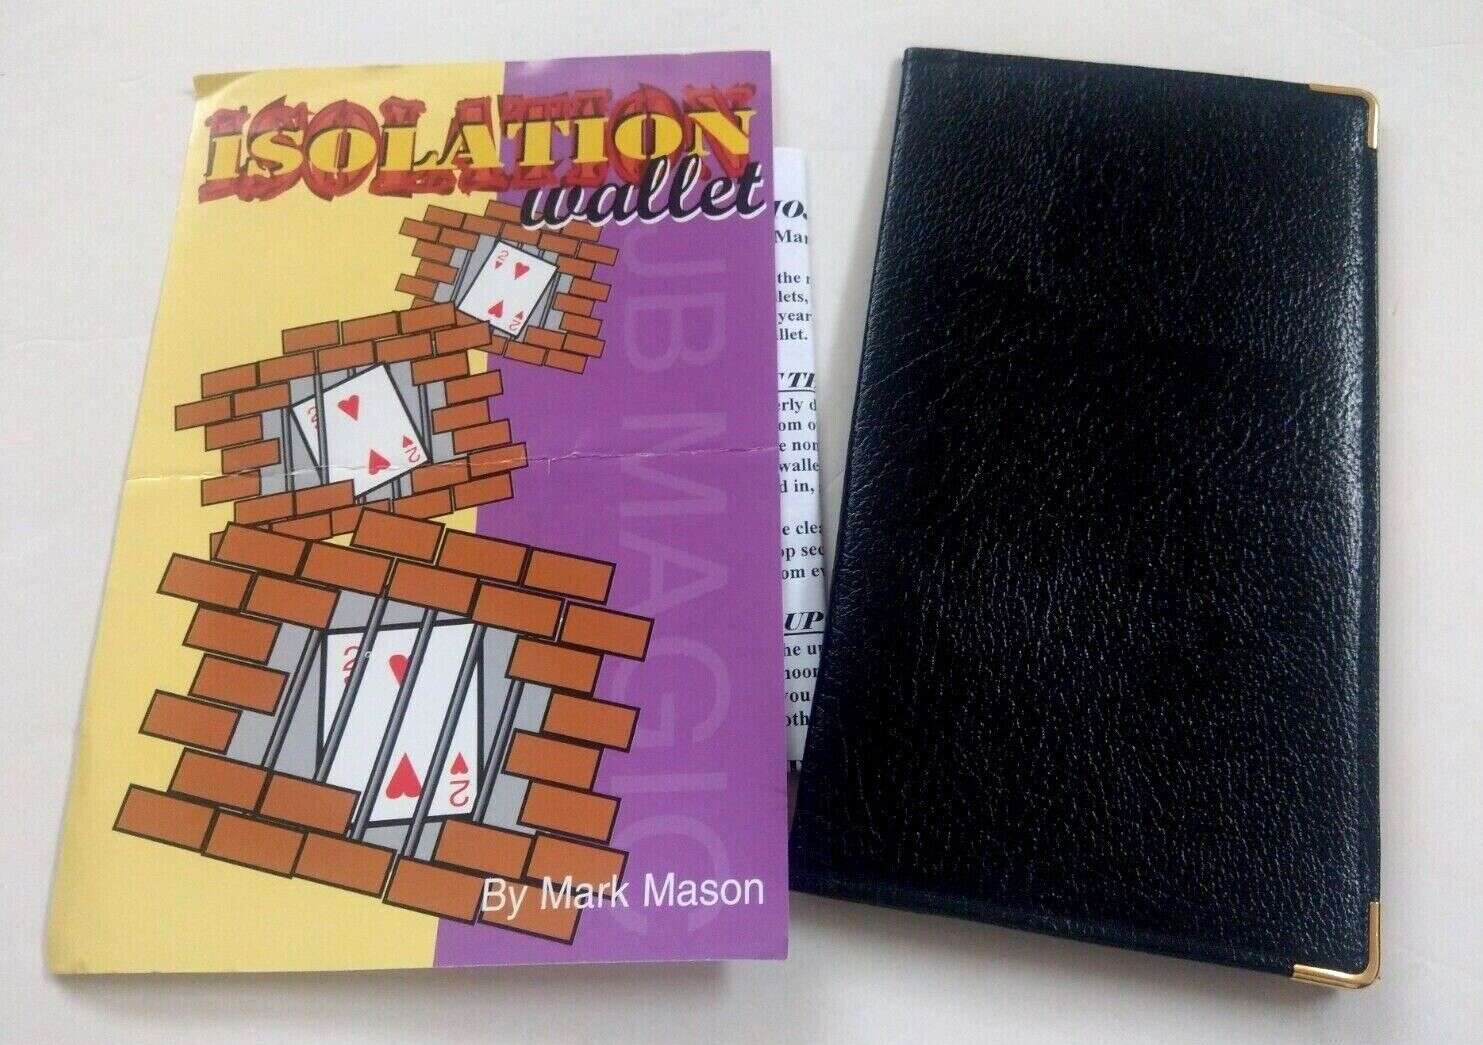 Isolation Wallet by Mark Mason and packaging